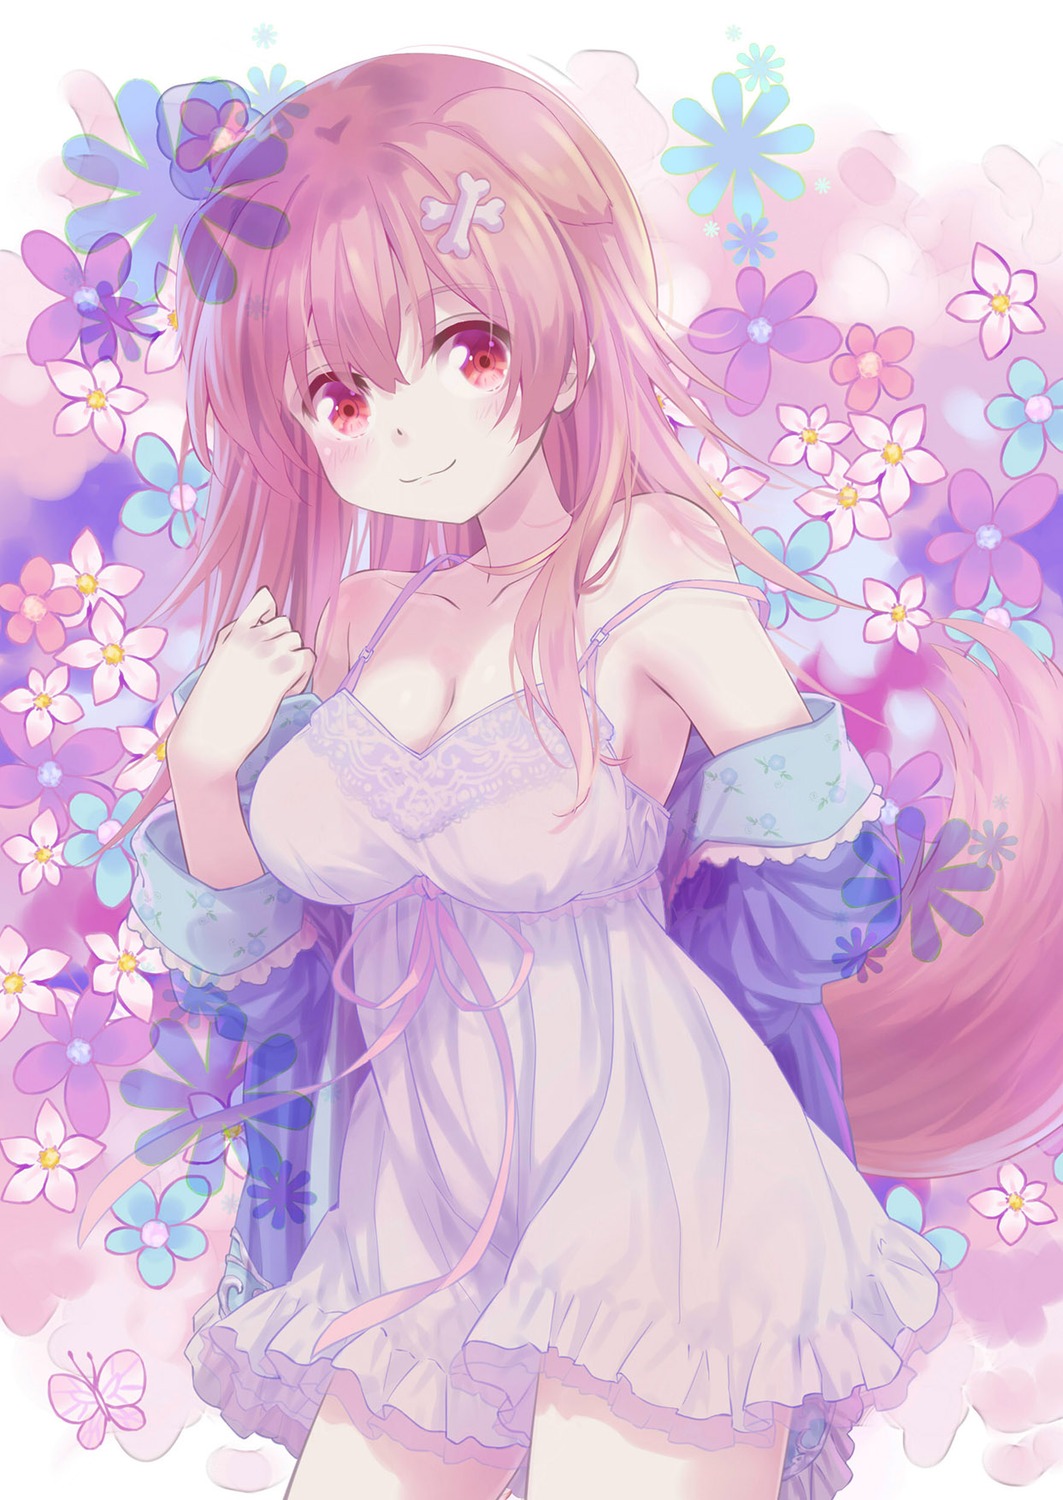 54hao animal_ears cleavage hololive hololive_gamers inugami_korone inumimi lingerie tail undressing